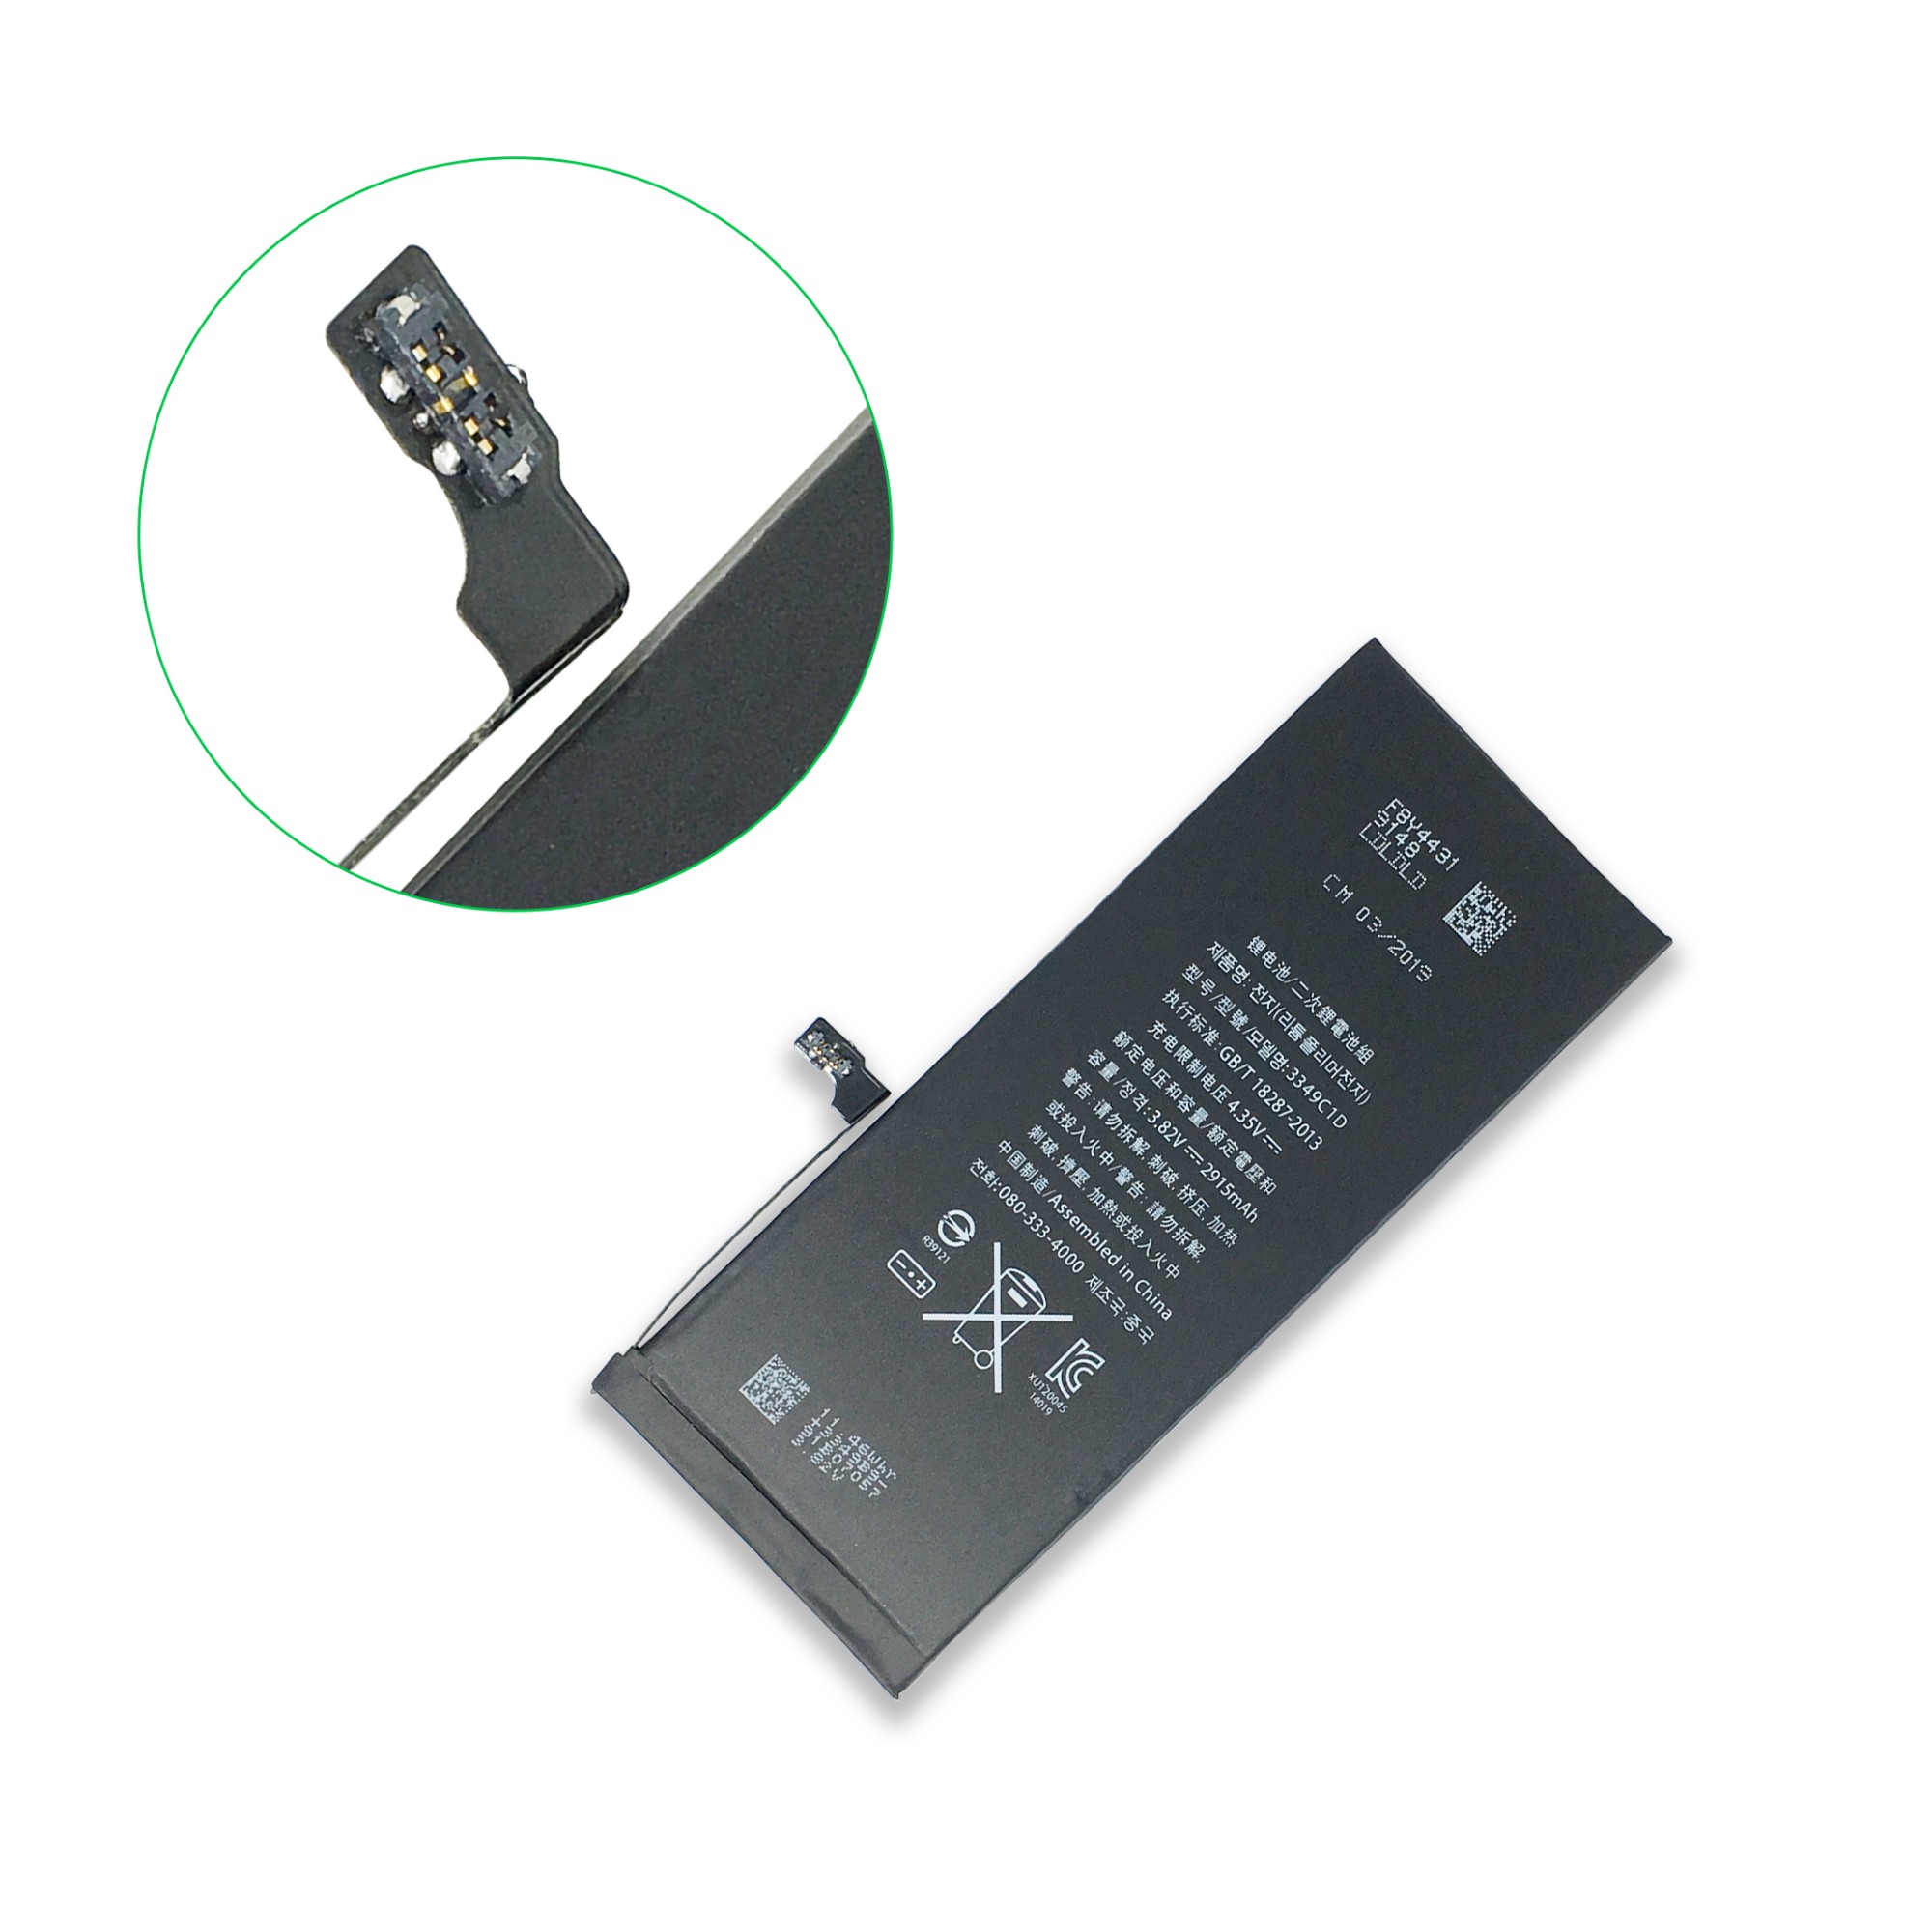 Hot Selling Wholesale Apple 2915mAh iphone 6 PLUS Battery in China